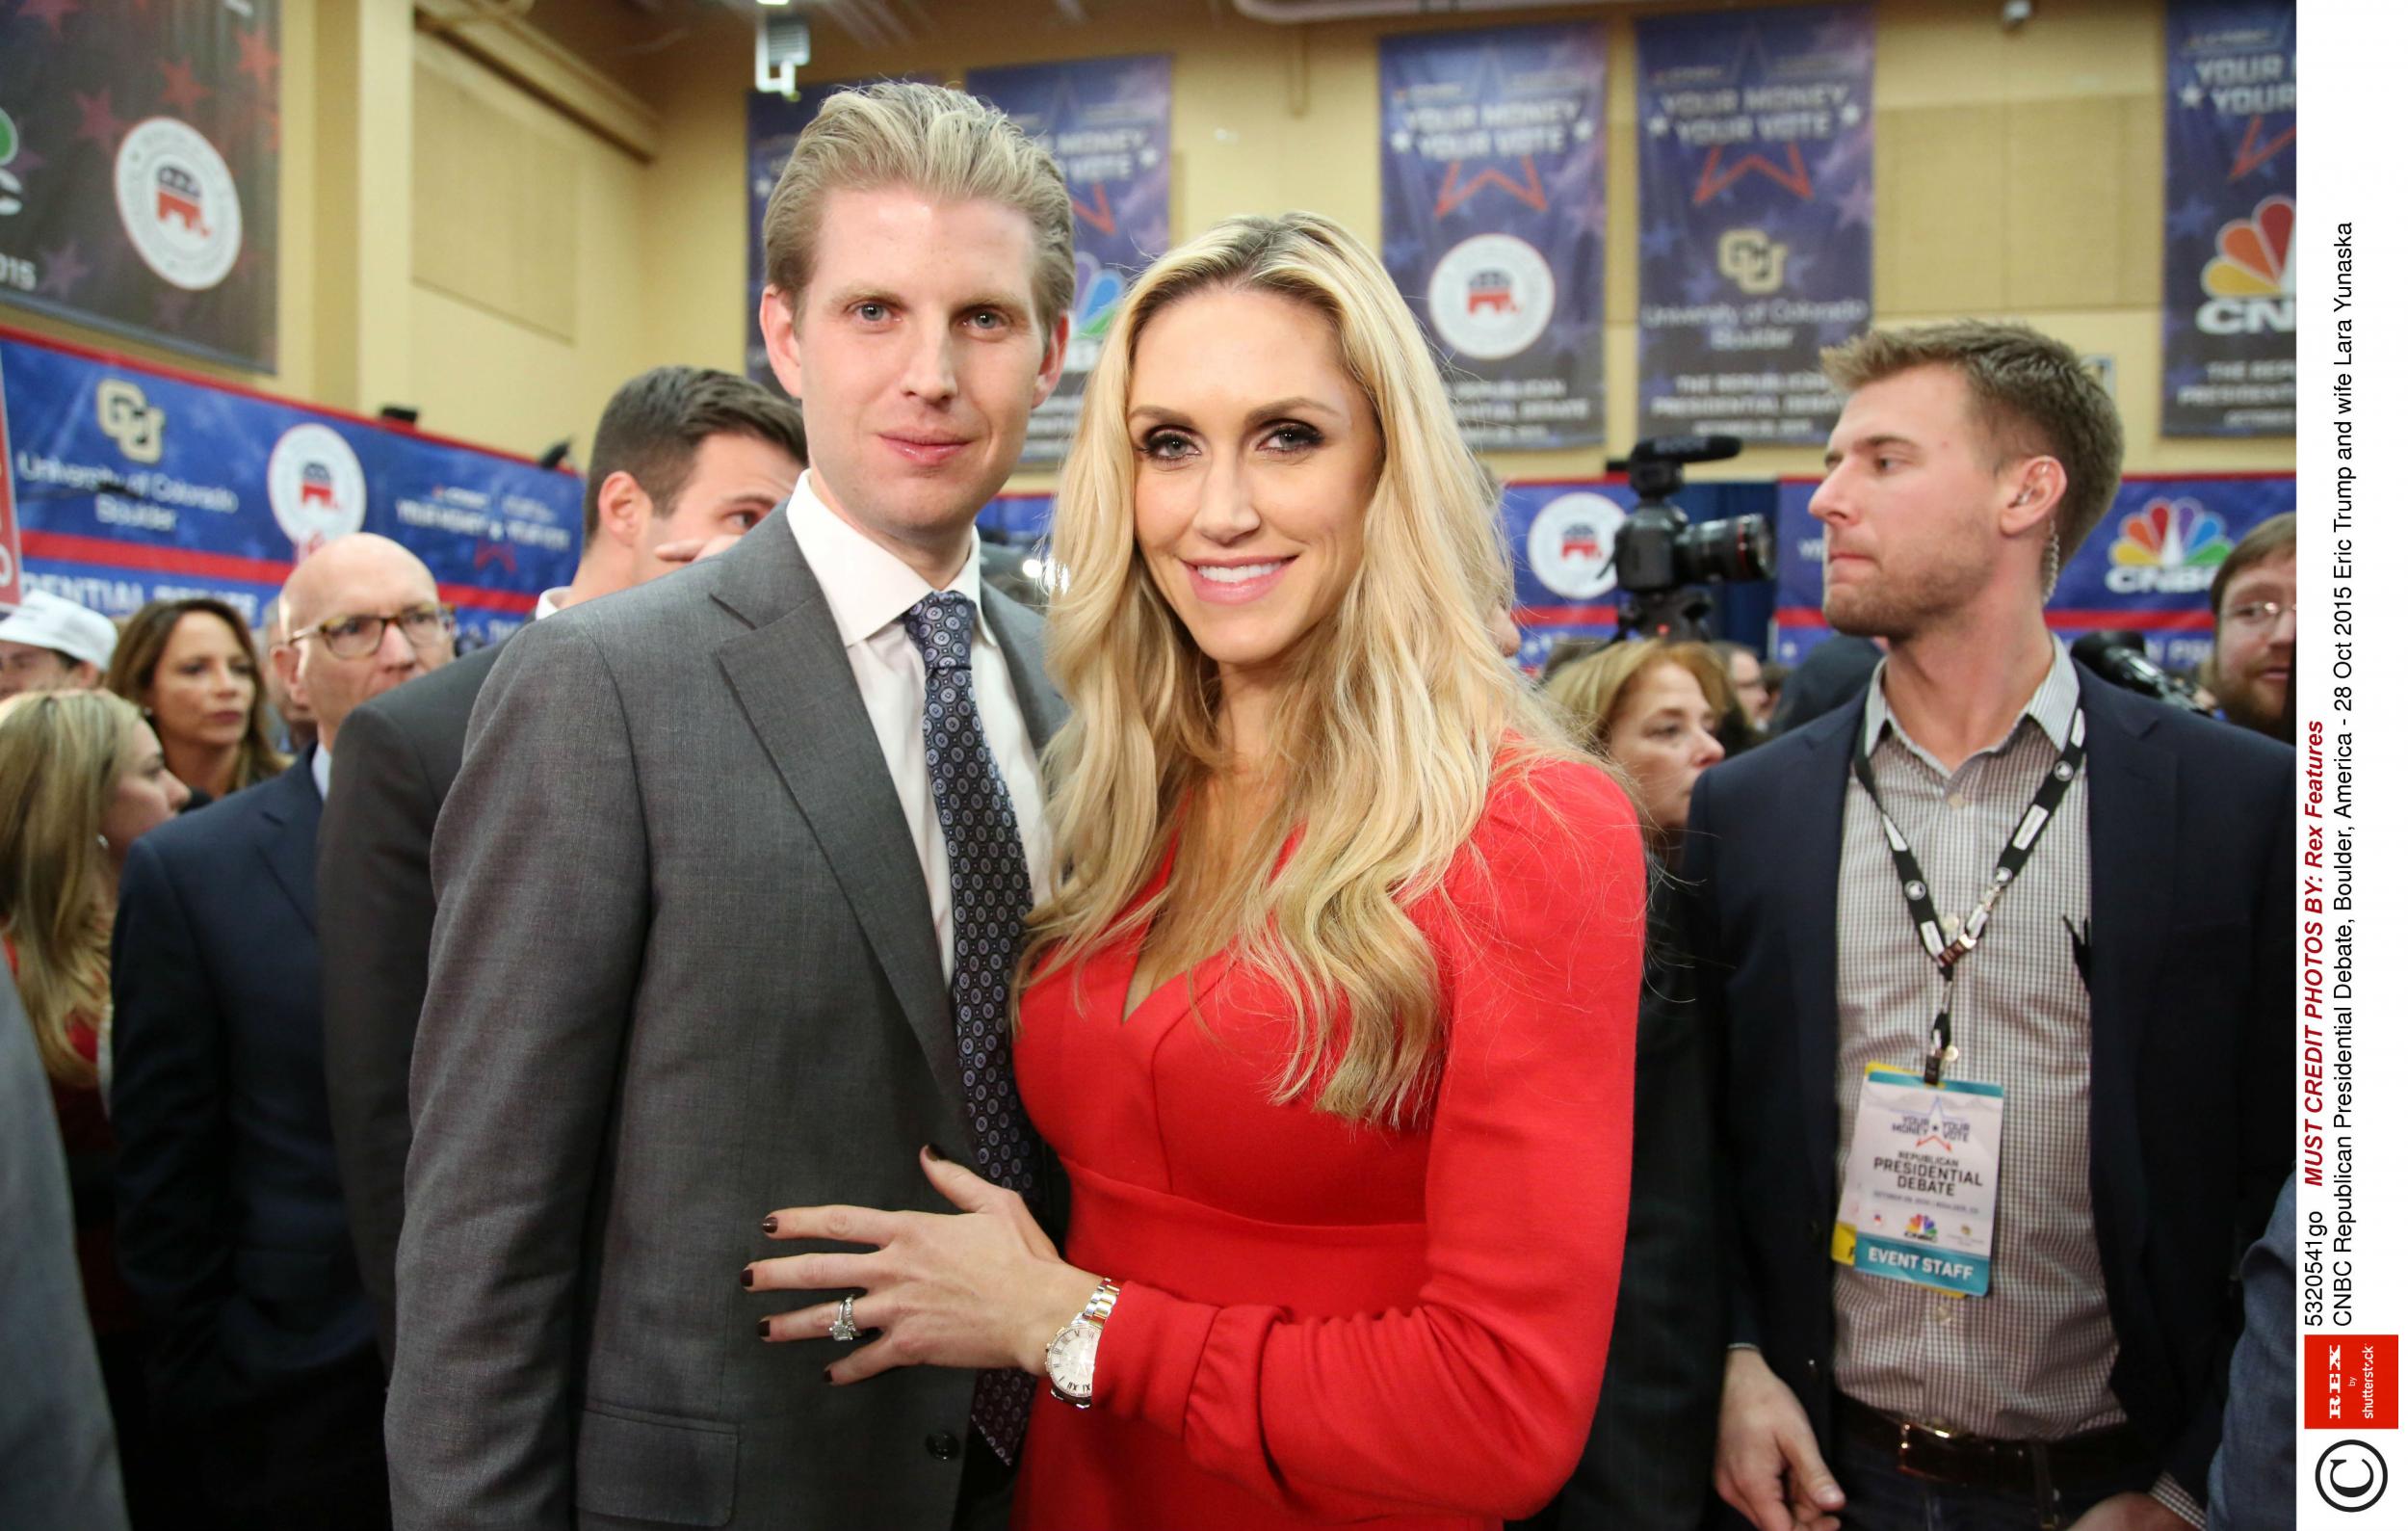 Lara Trump presumably did not mean to "like" a tweet about her father-in-law by "Fascists 4 Trump"